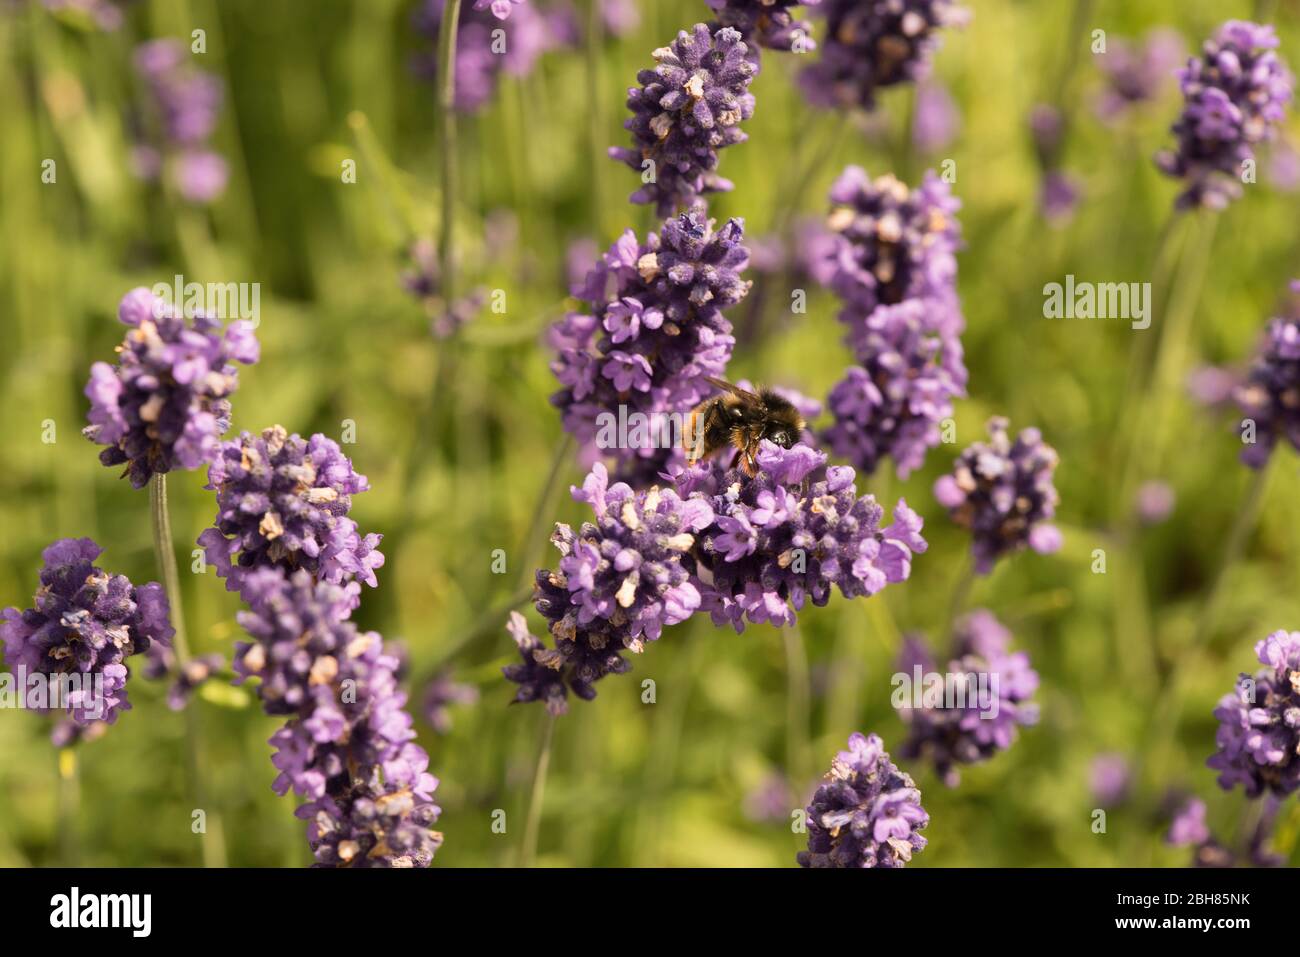 Bee collecting nectar from Lavender in an English garden; Stock Photo